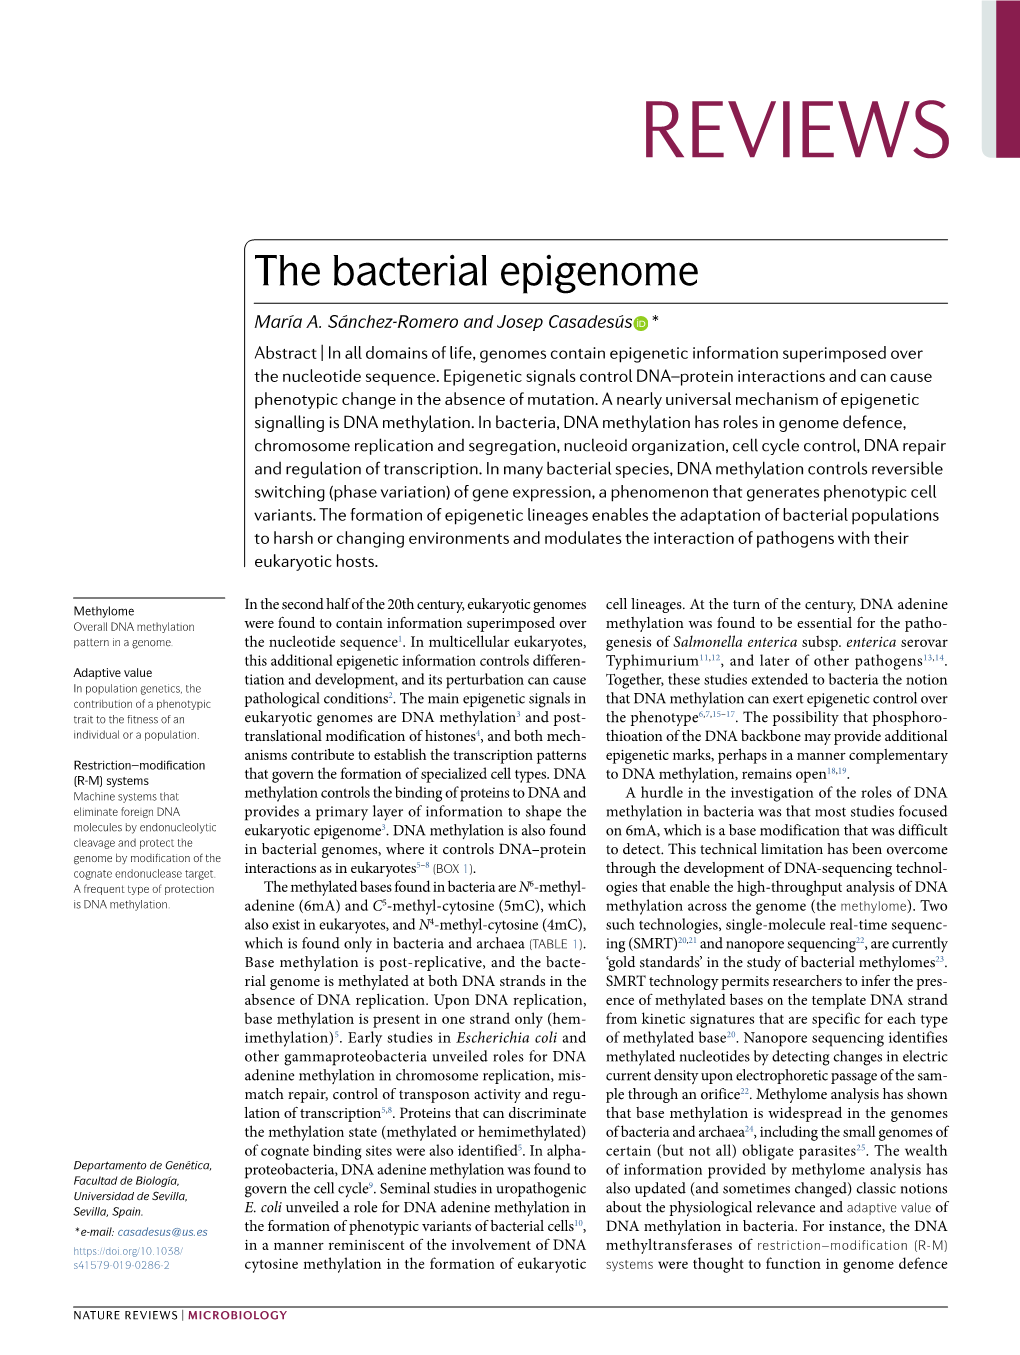 The Bacterial Epigenome